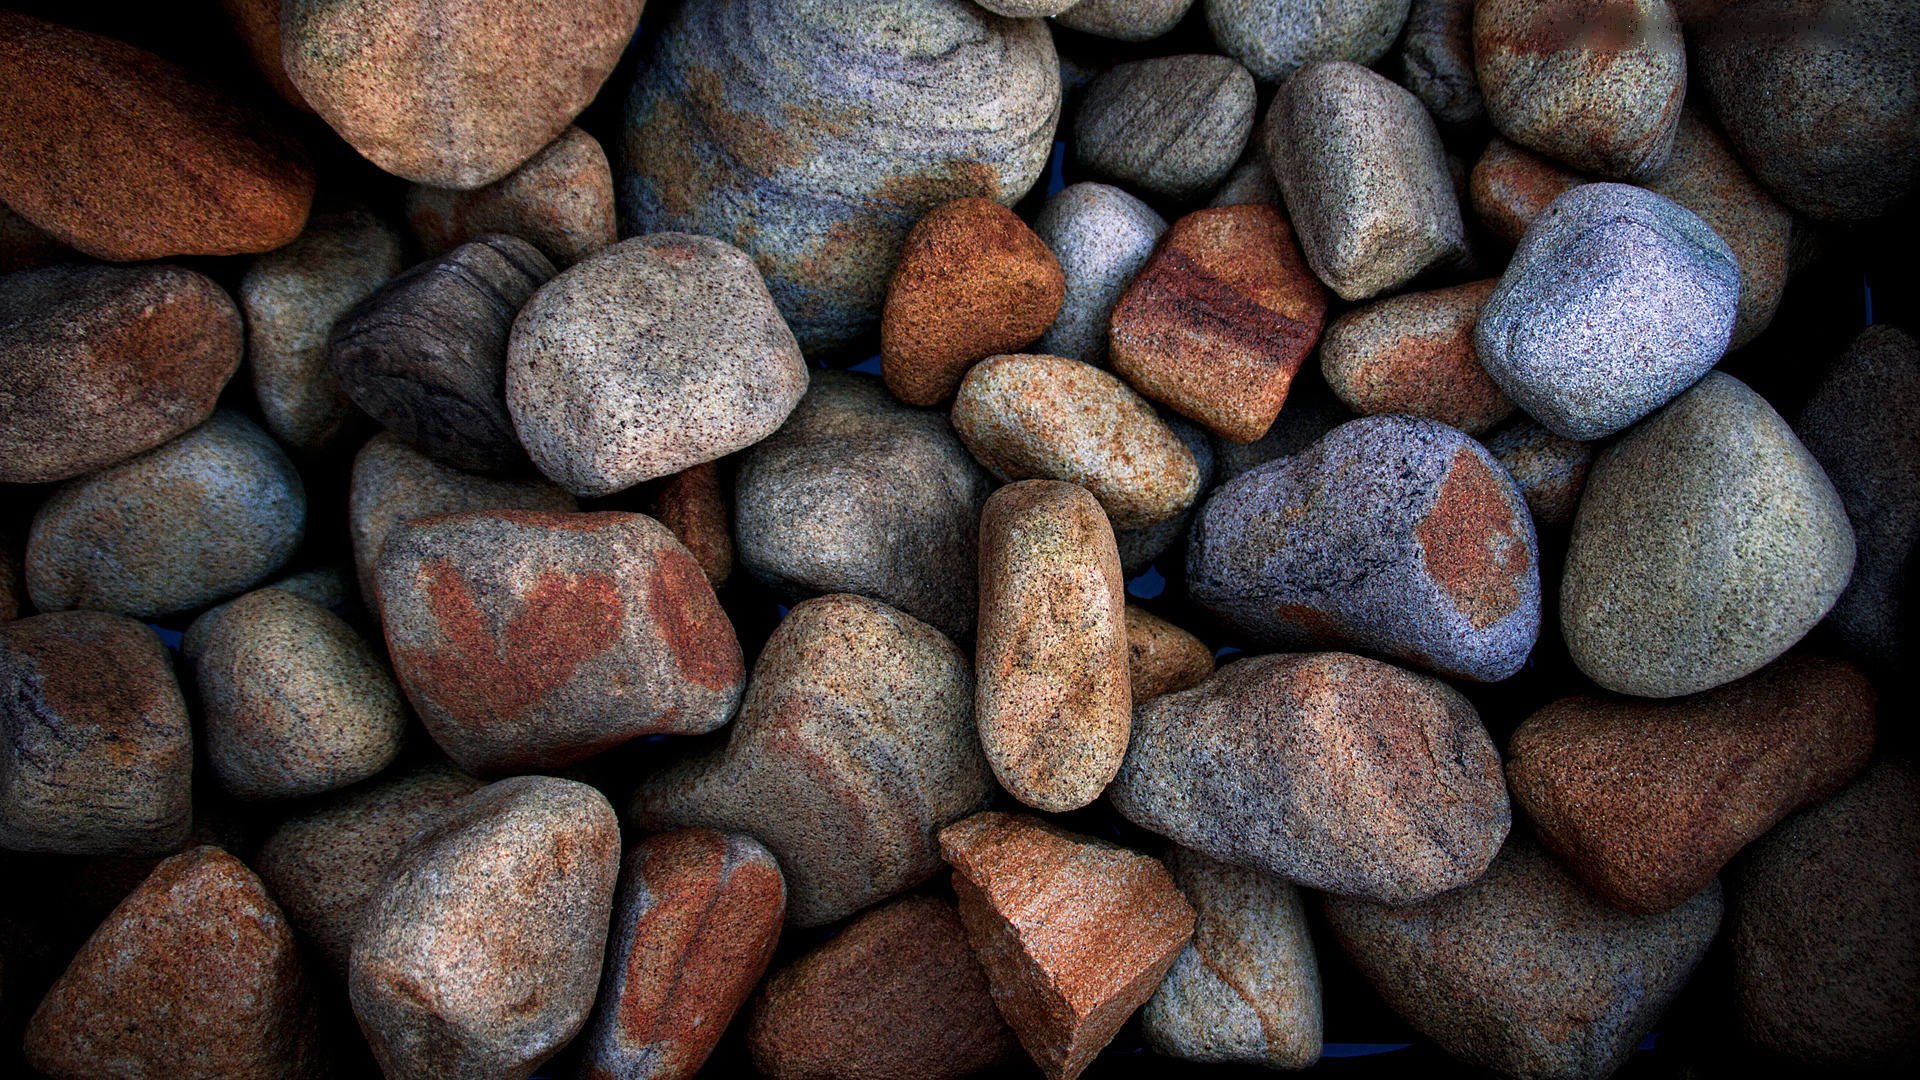 Free Download Pictures Full Hd Wallpapers 1920x1080 Macro Pebbles Rocks Stones 1920x1080 For Your Desktop Mobile Tablet Explore 47 Hd Stone Wallpaper Emma Stone Wallpaper Hd Rock Wallpaper For